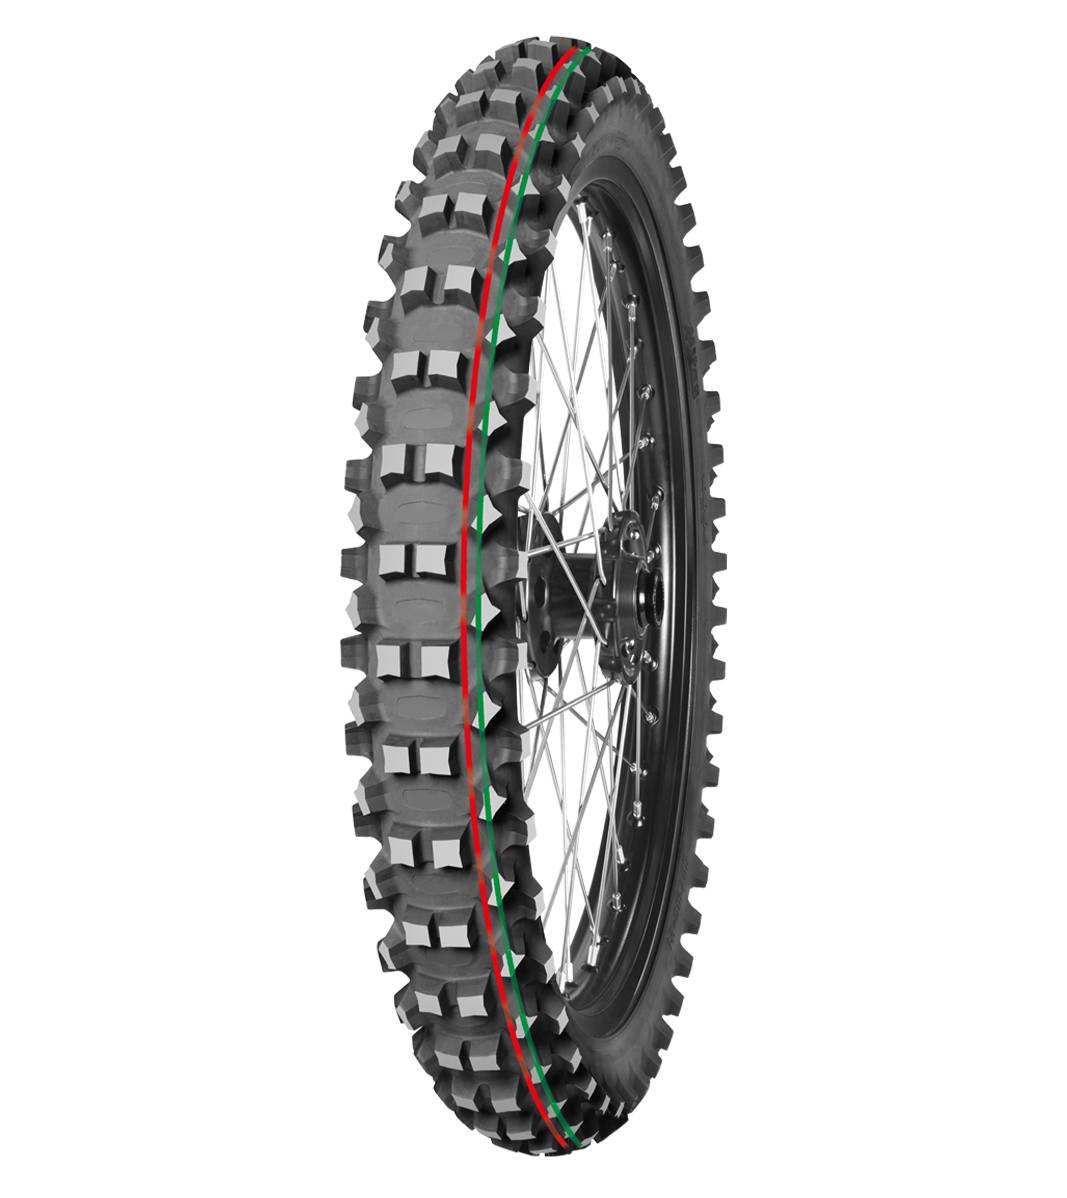 Mitas TERRA FORCE-MX MH 80/100-21 Motocross Competition Off-Road MEDIUM TO HARD 51M Red & Green Tube Front Tire, 226733, 80/100-21, Front, Motocross, Motocross Competition, Off-Road, Terra Force, Terra Force-MX MH, Trail, Tires - Imported and distributed in North & South America by Lindeco Genuine Powersports - Premier Powersports Equipment and Accessories for Motorcycle Enthusiasts, Professional Riders and Dealers.